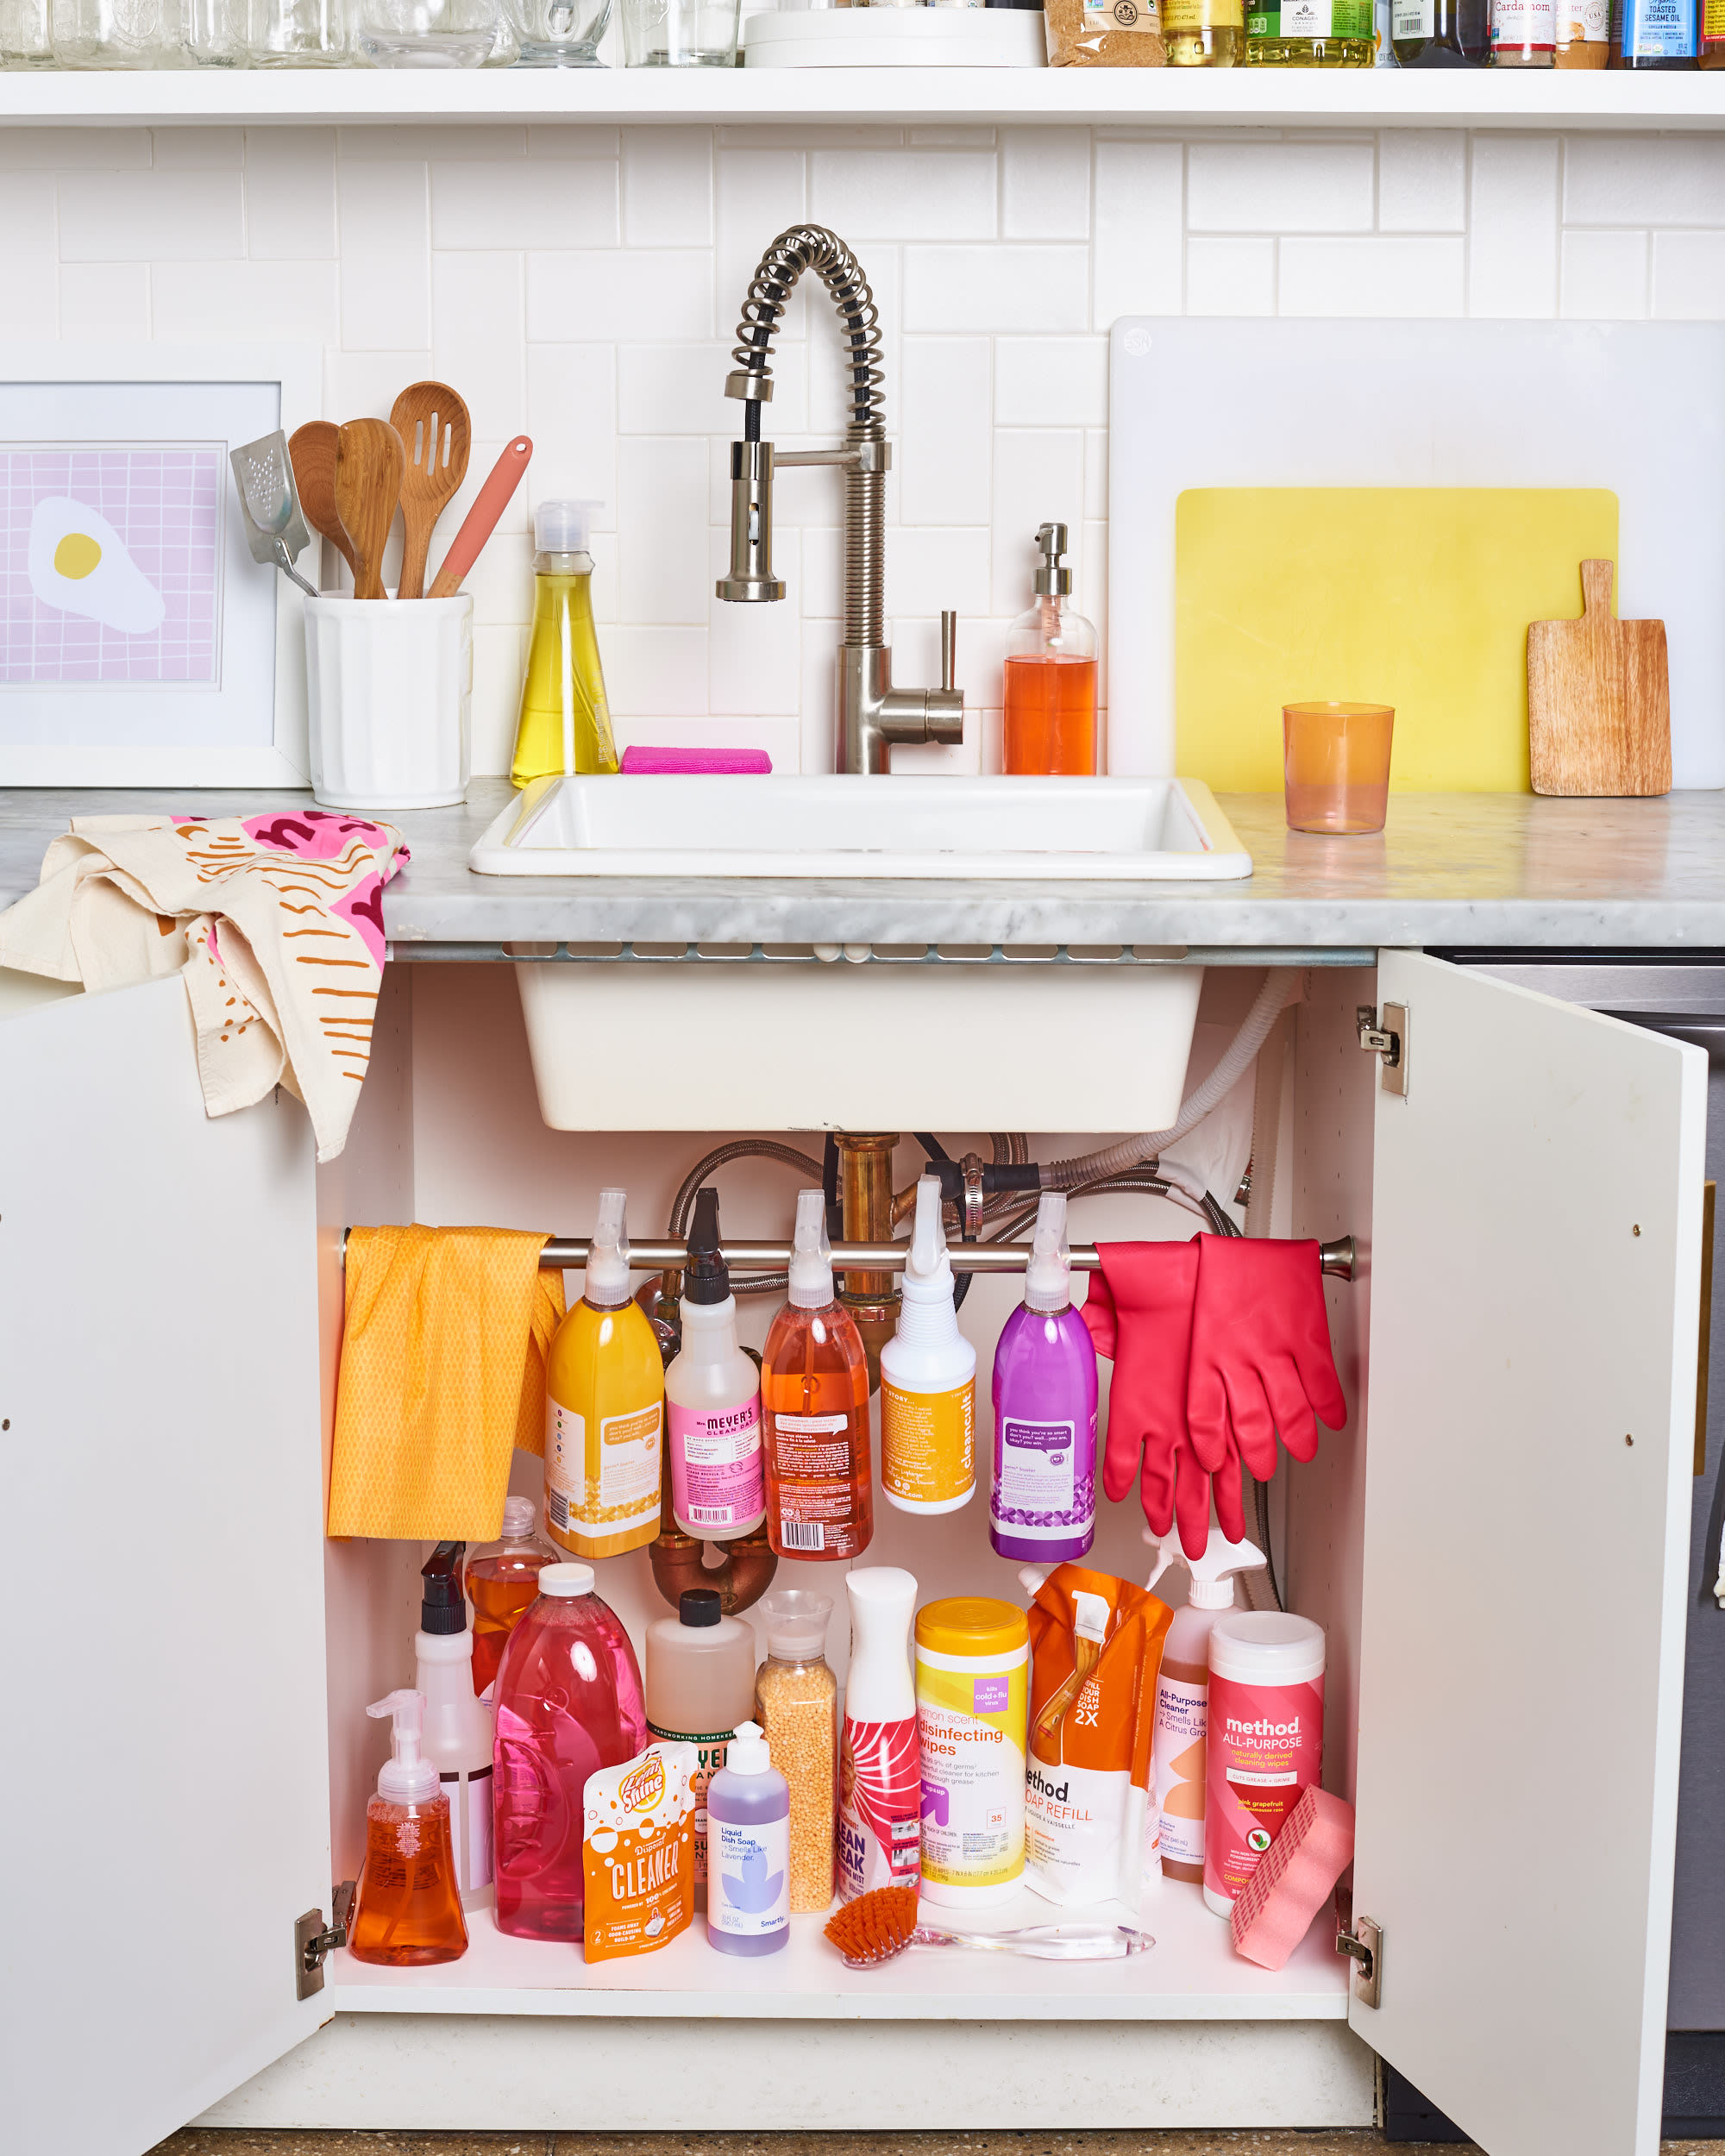 How To Safely Store Your Cleaning Products – Kitchen Stuff Plus